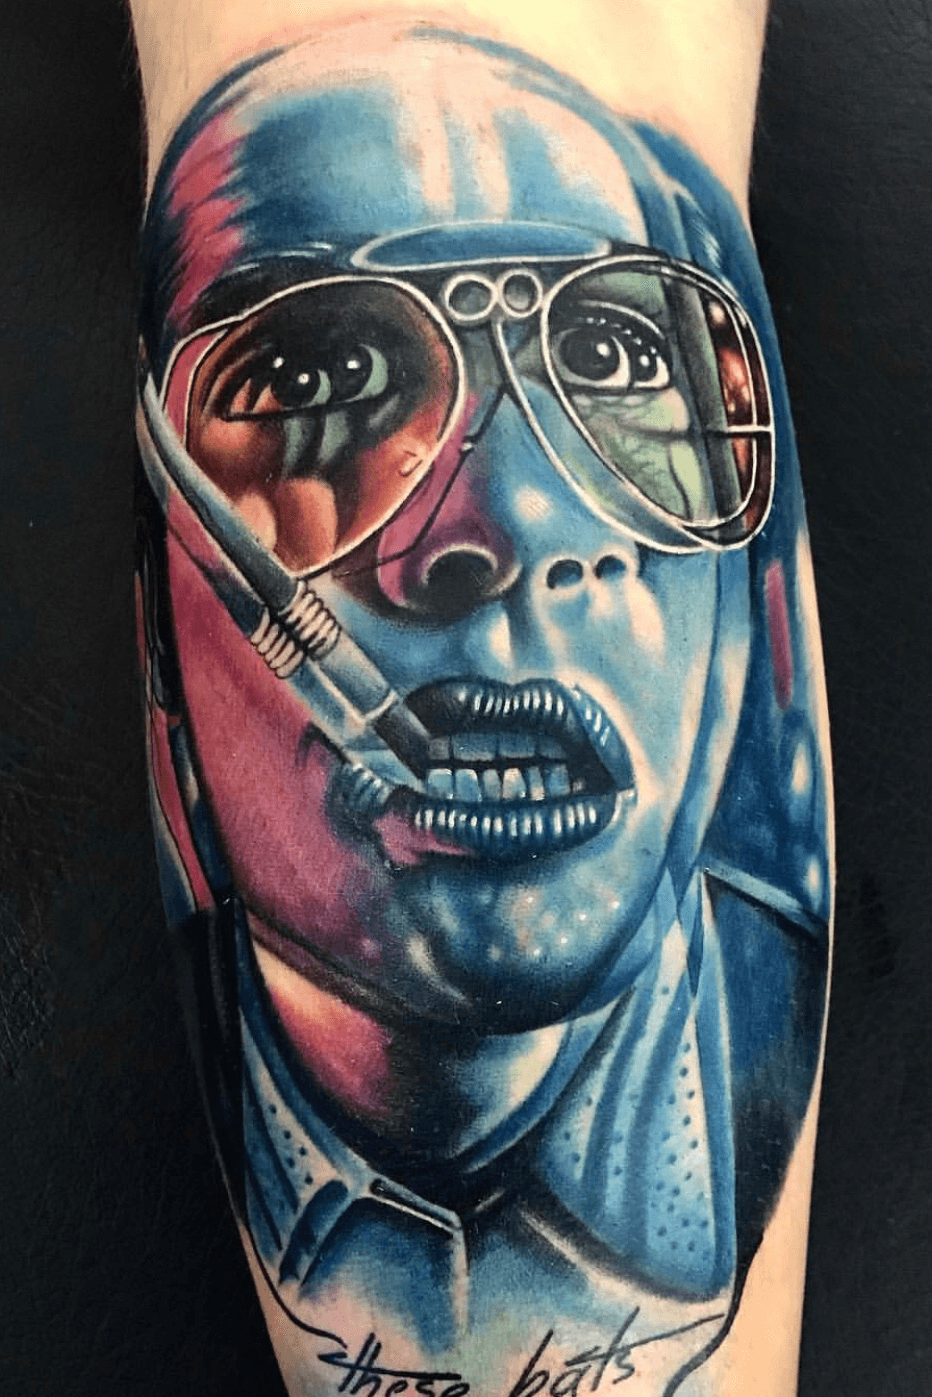 This Tattoo Artist Specializes In Trippy Tattoos And It Looks Totally Cool  23 Pics  Bored Panda